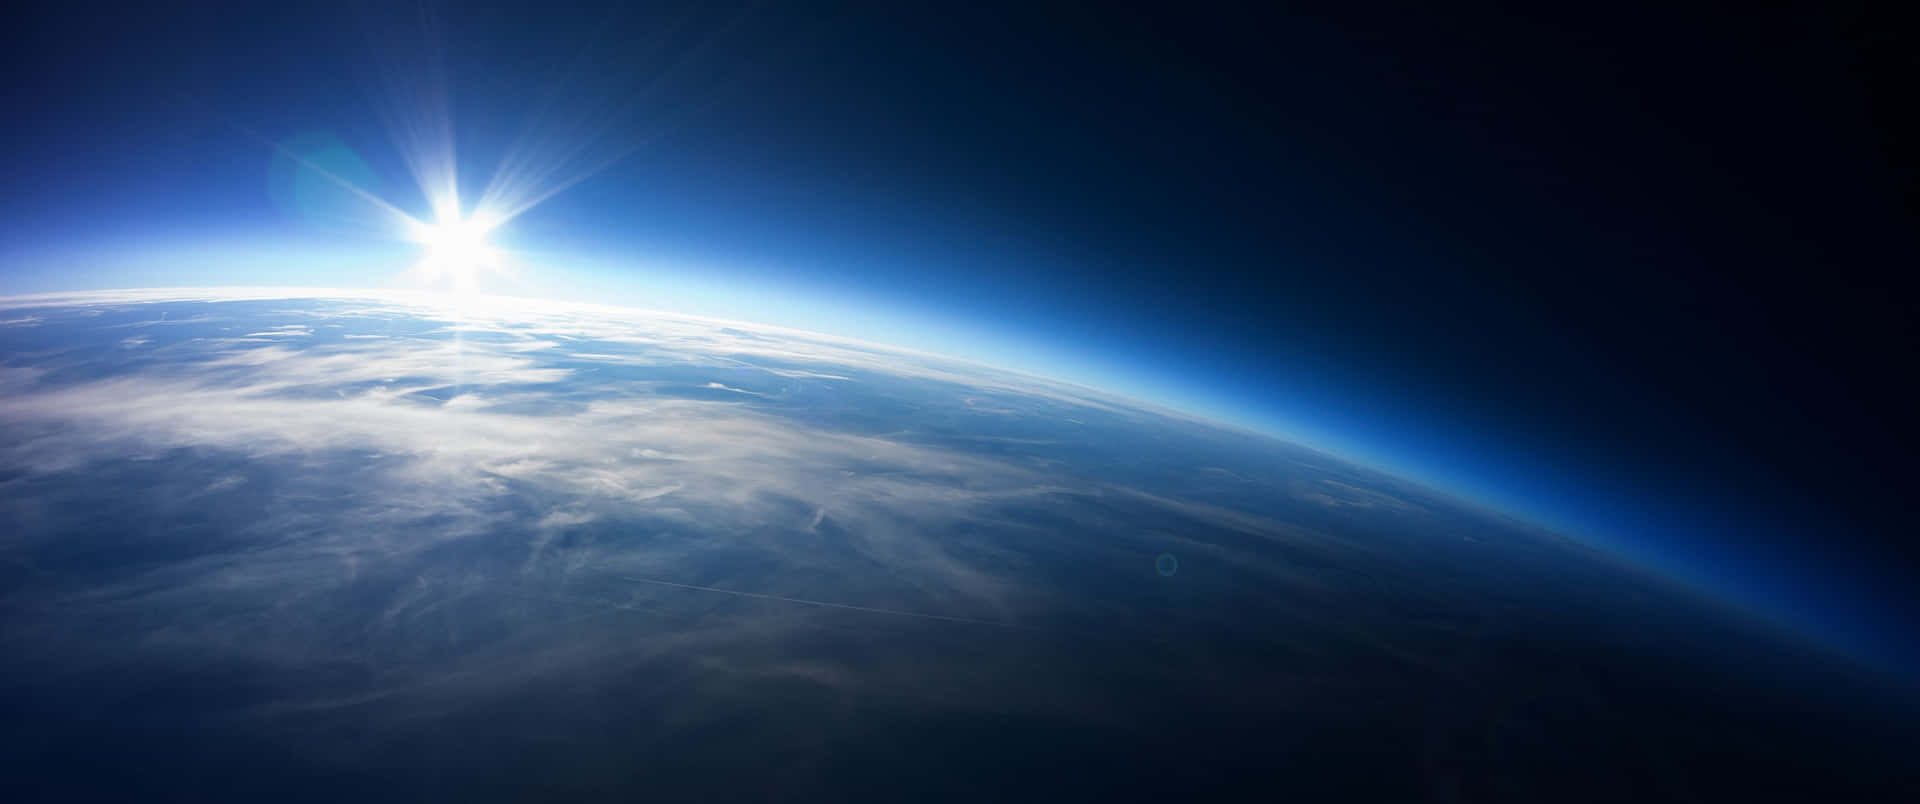 3440x1440p Sunrise From Space Background